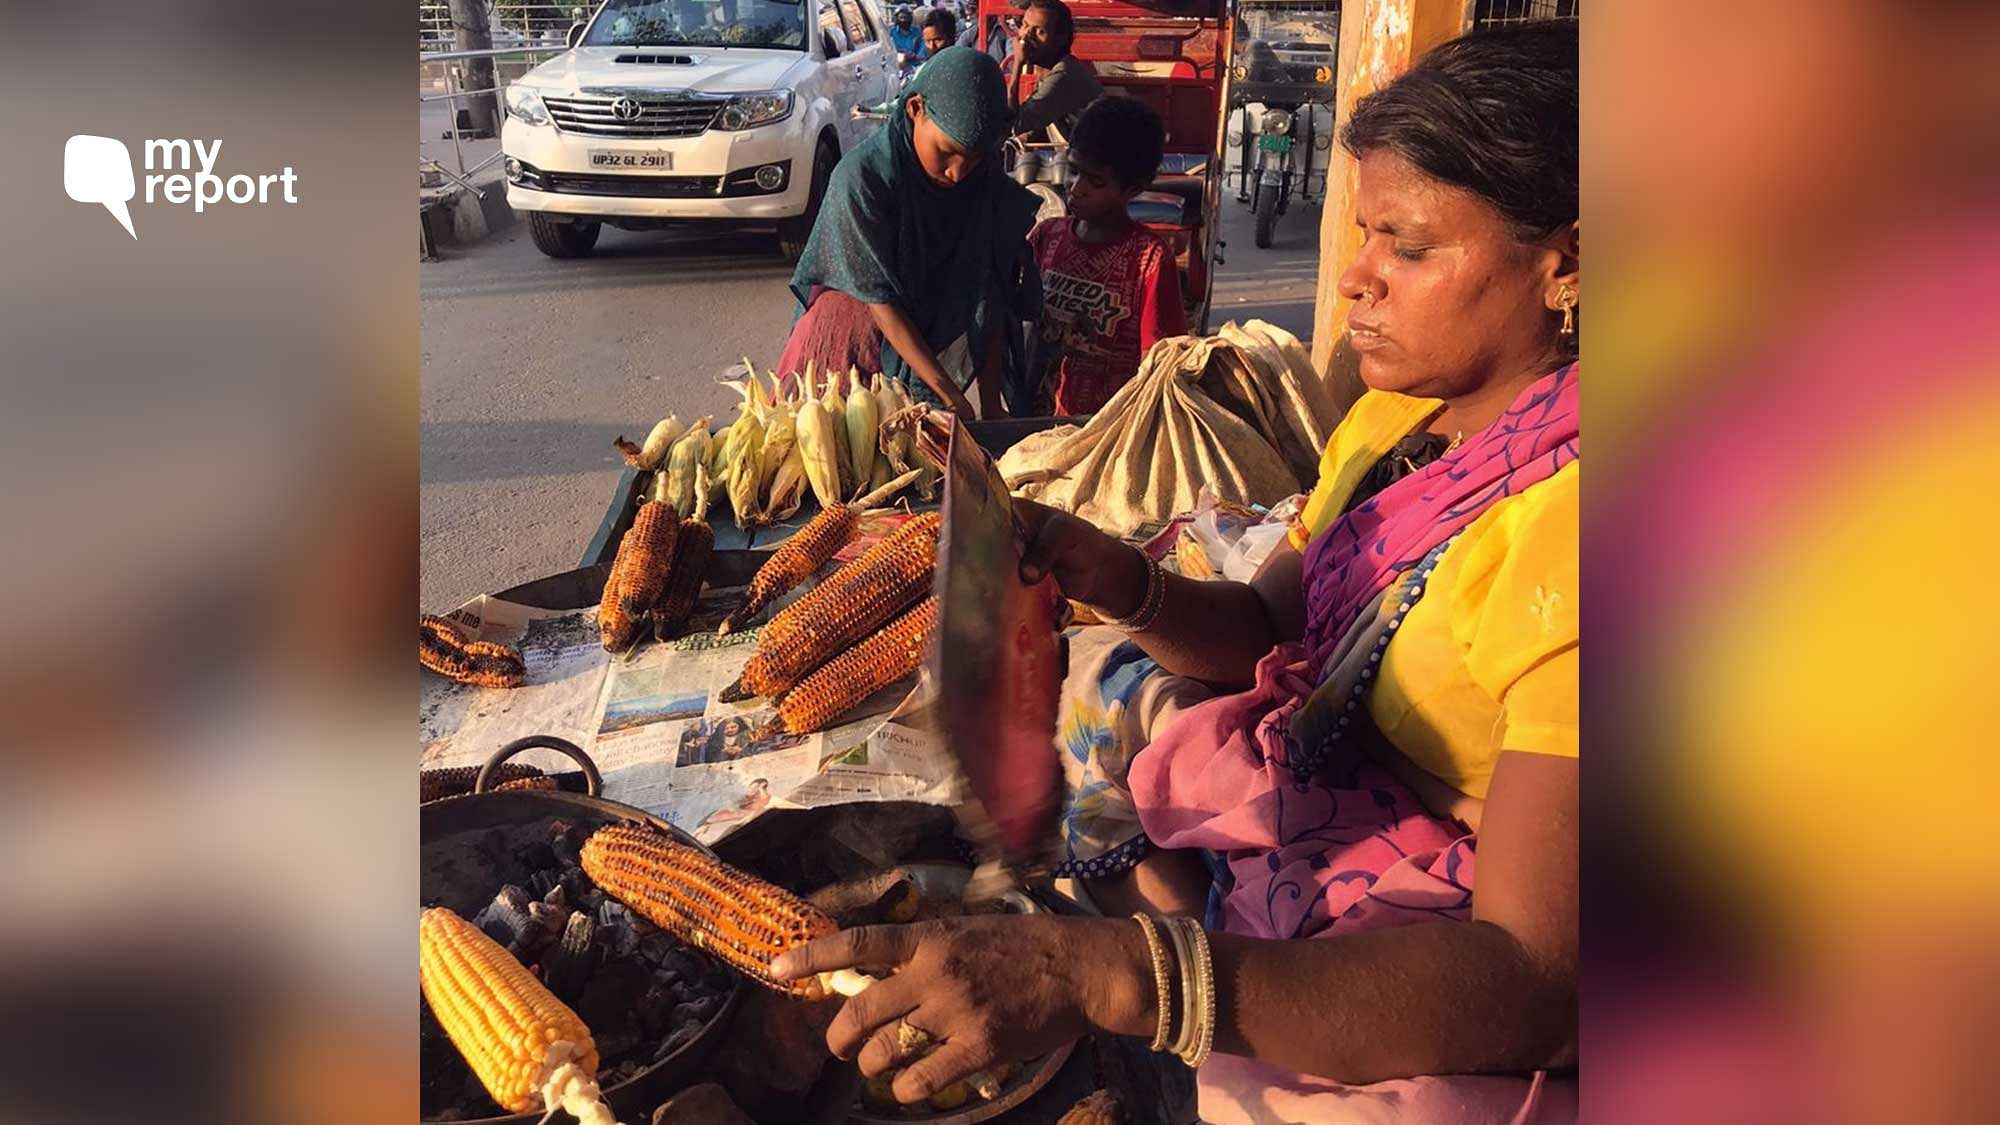 Local street vendors at Chowk in Lucknow.